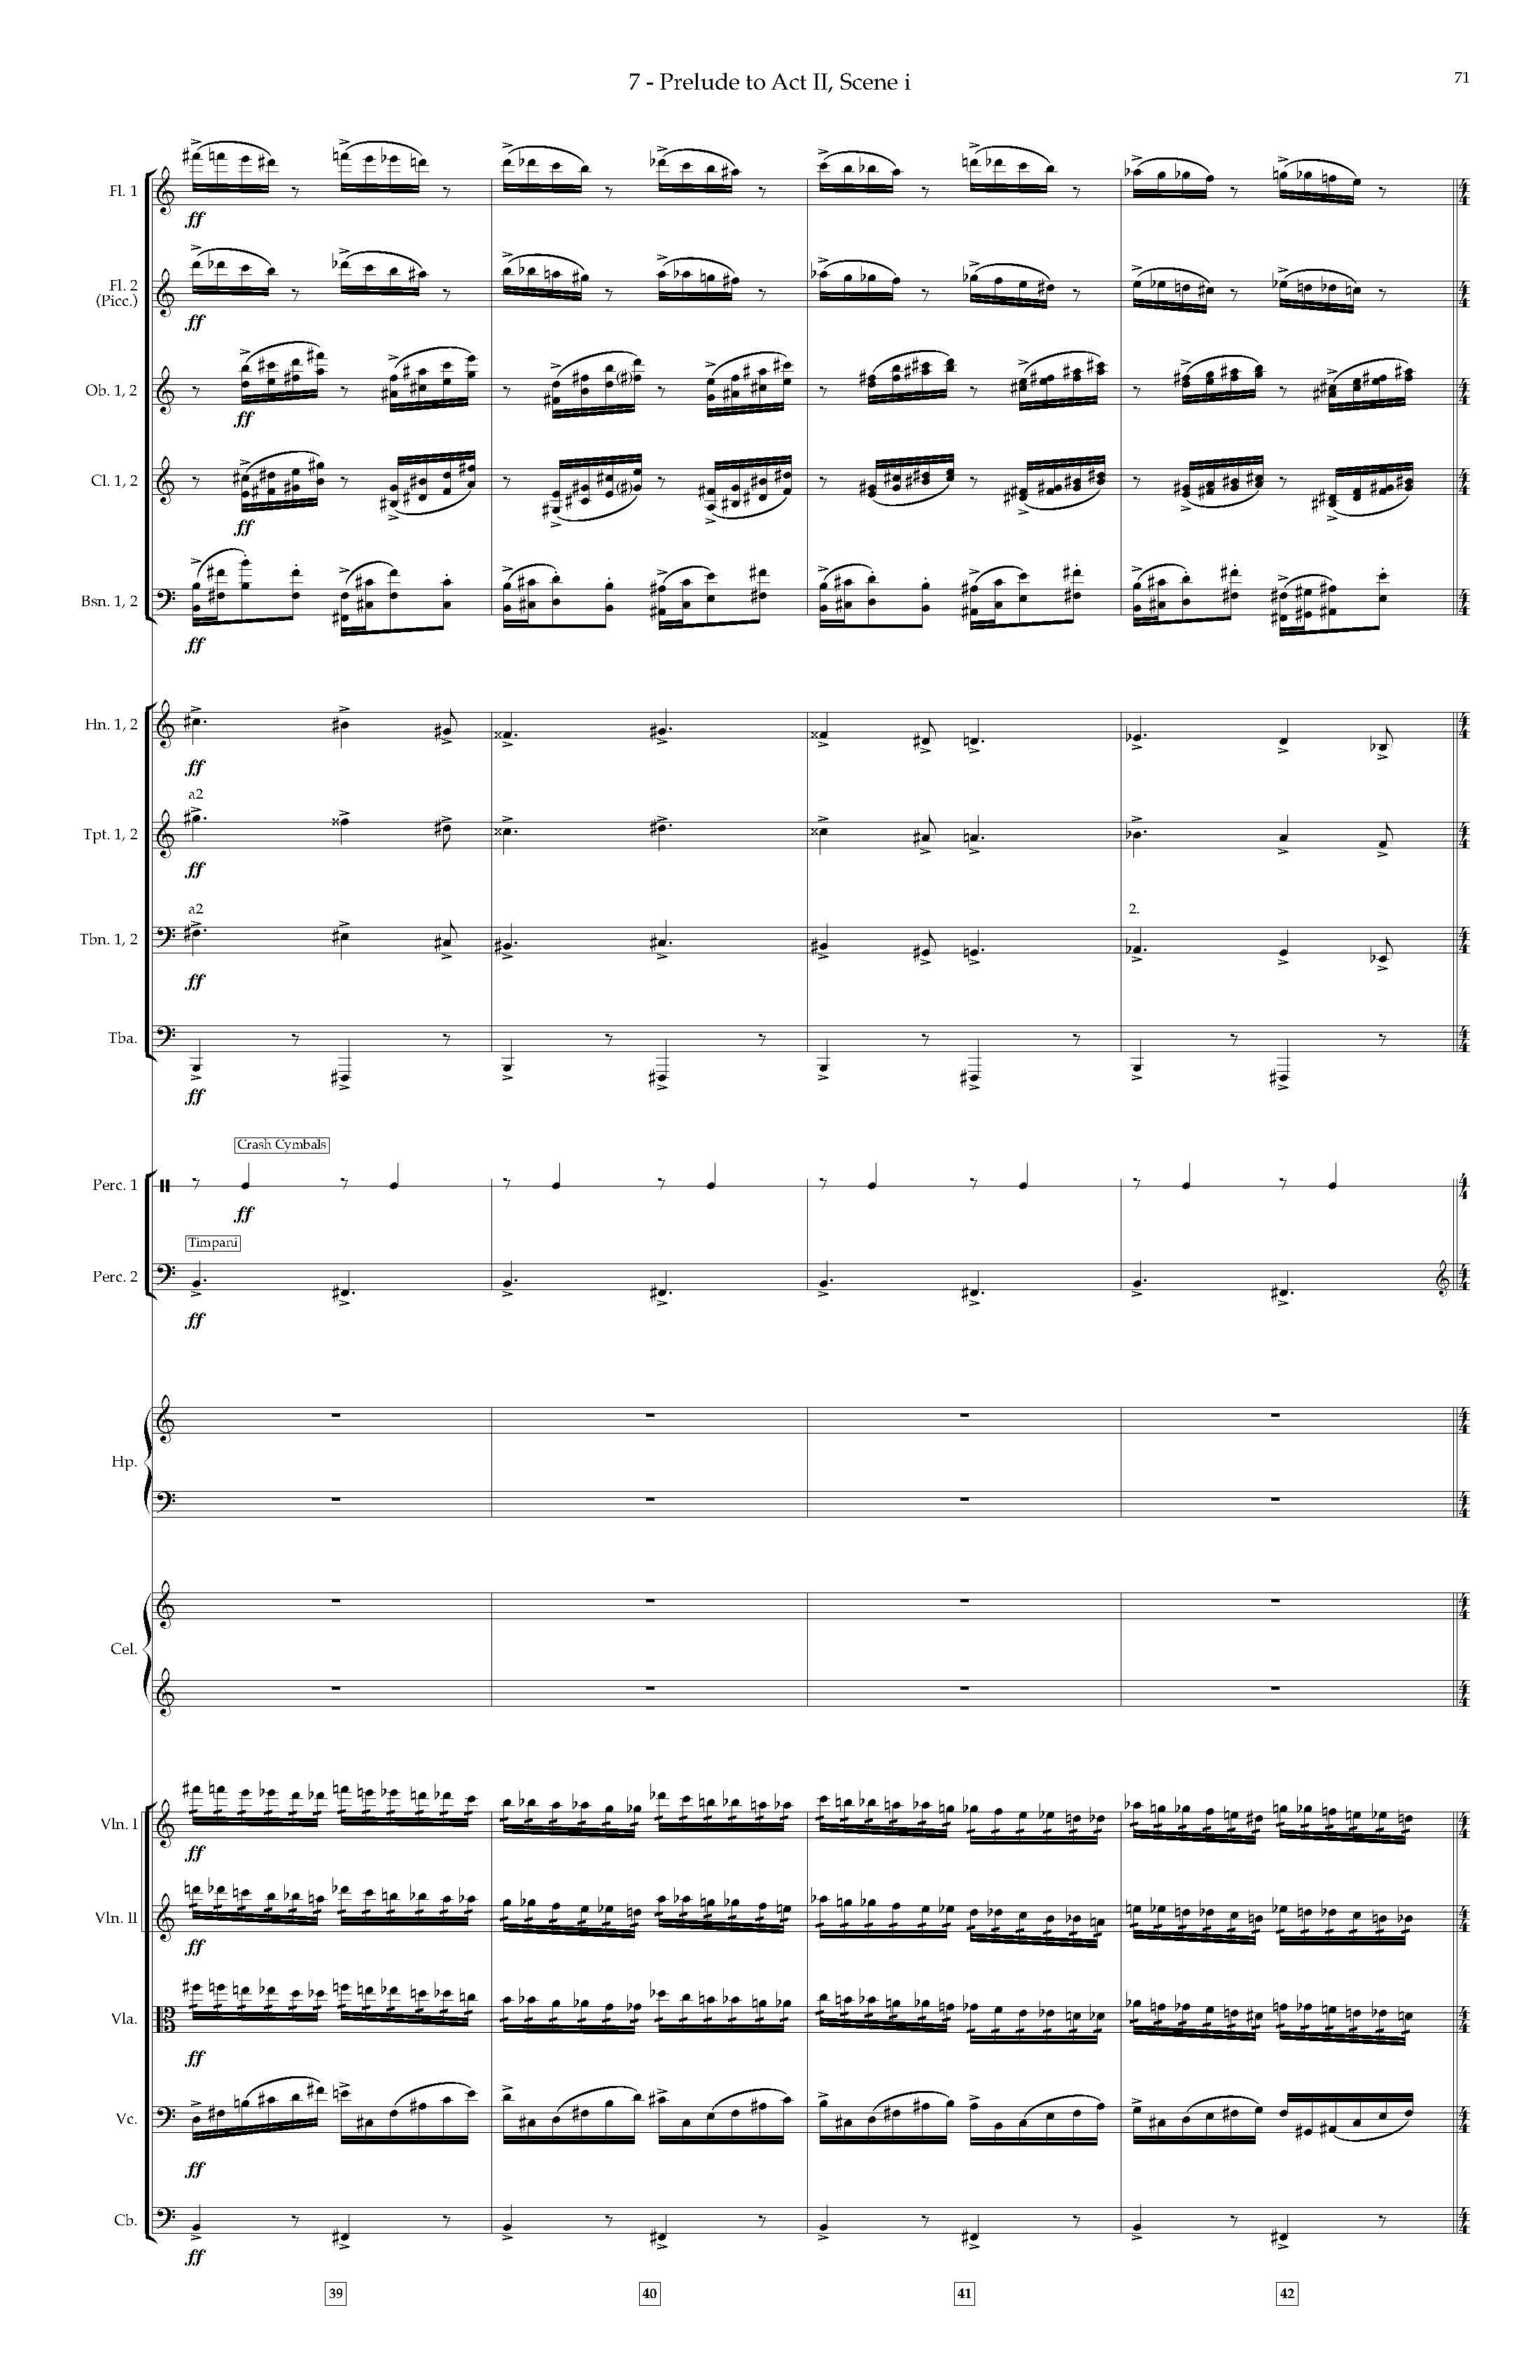 Arias and Interludes from HWGS - Complete Score_Page_77.jpg